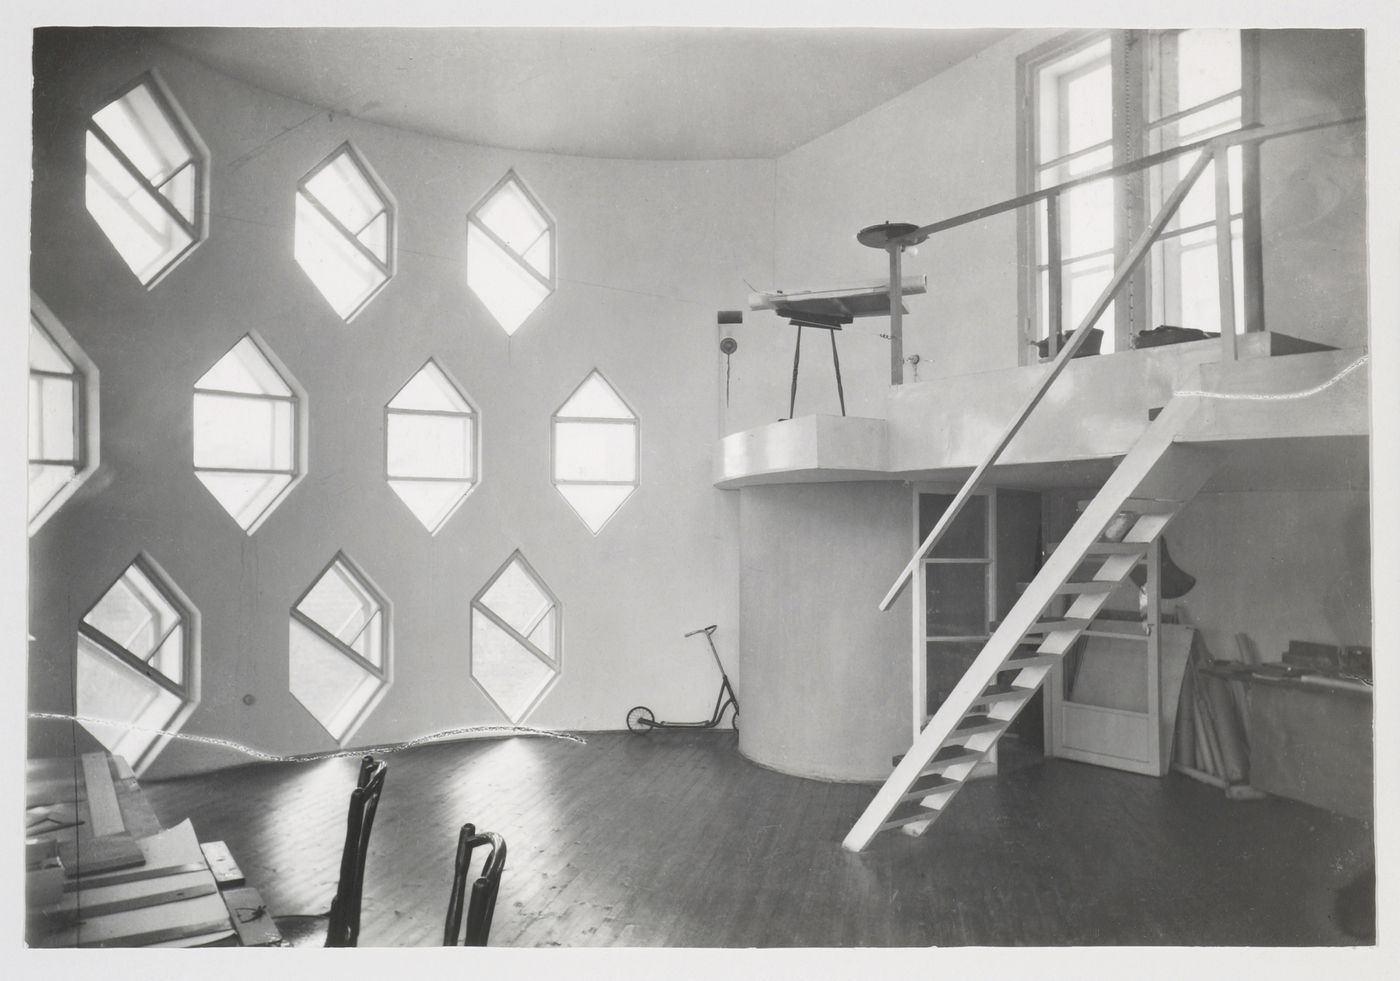 Interior view of the architect's studio in the Melnikov residence, Moscow